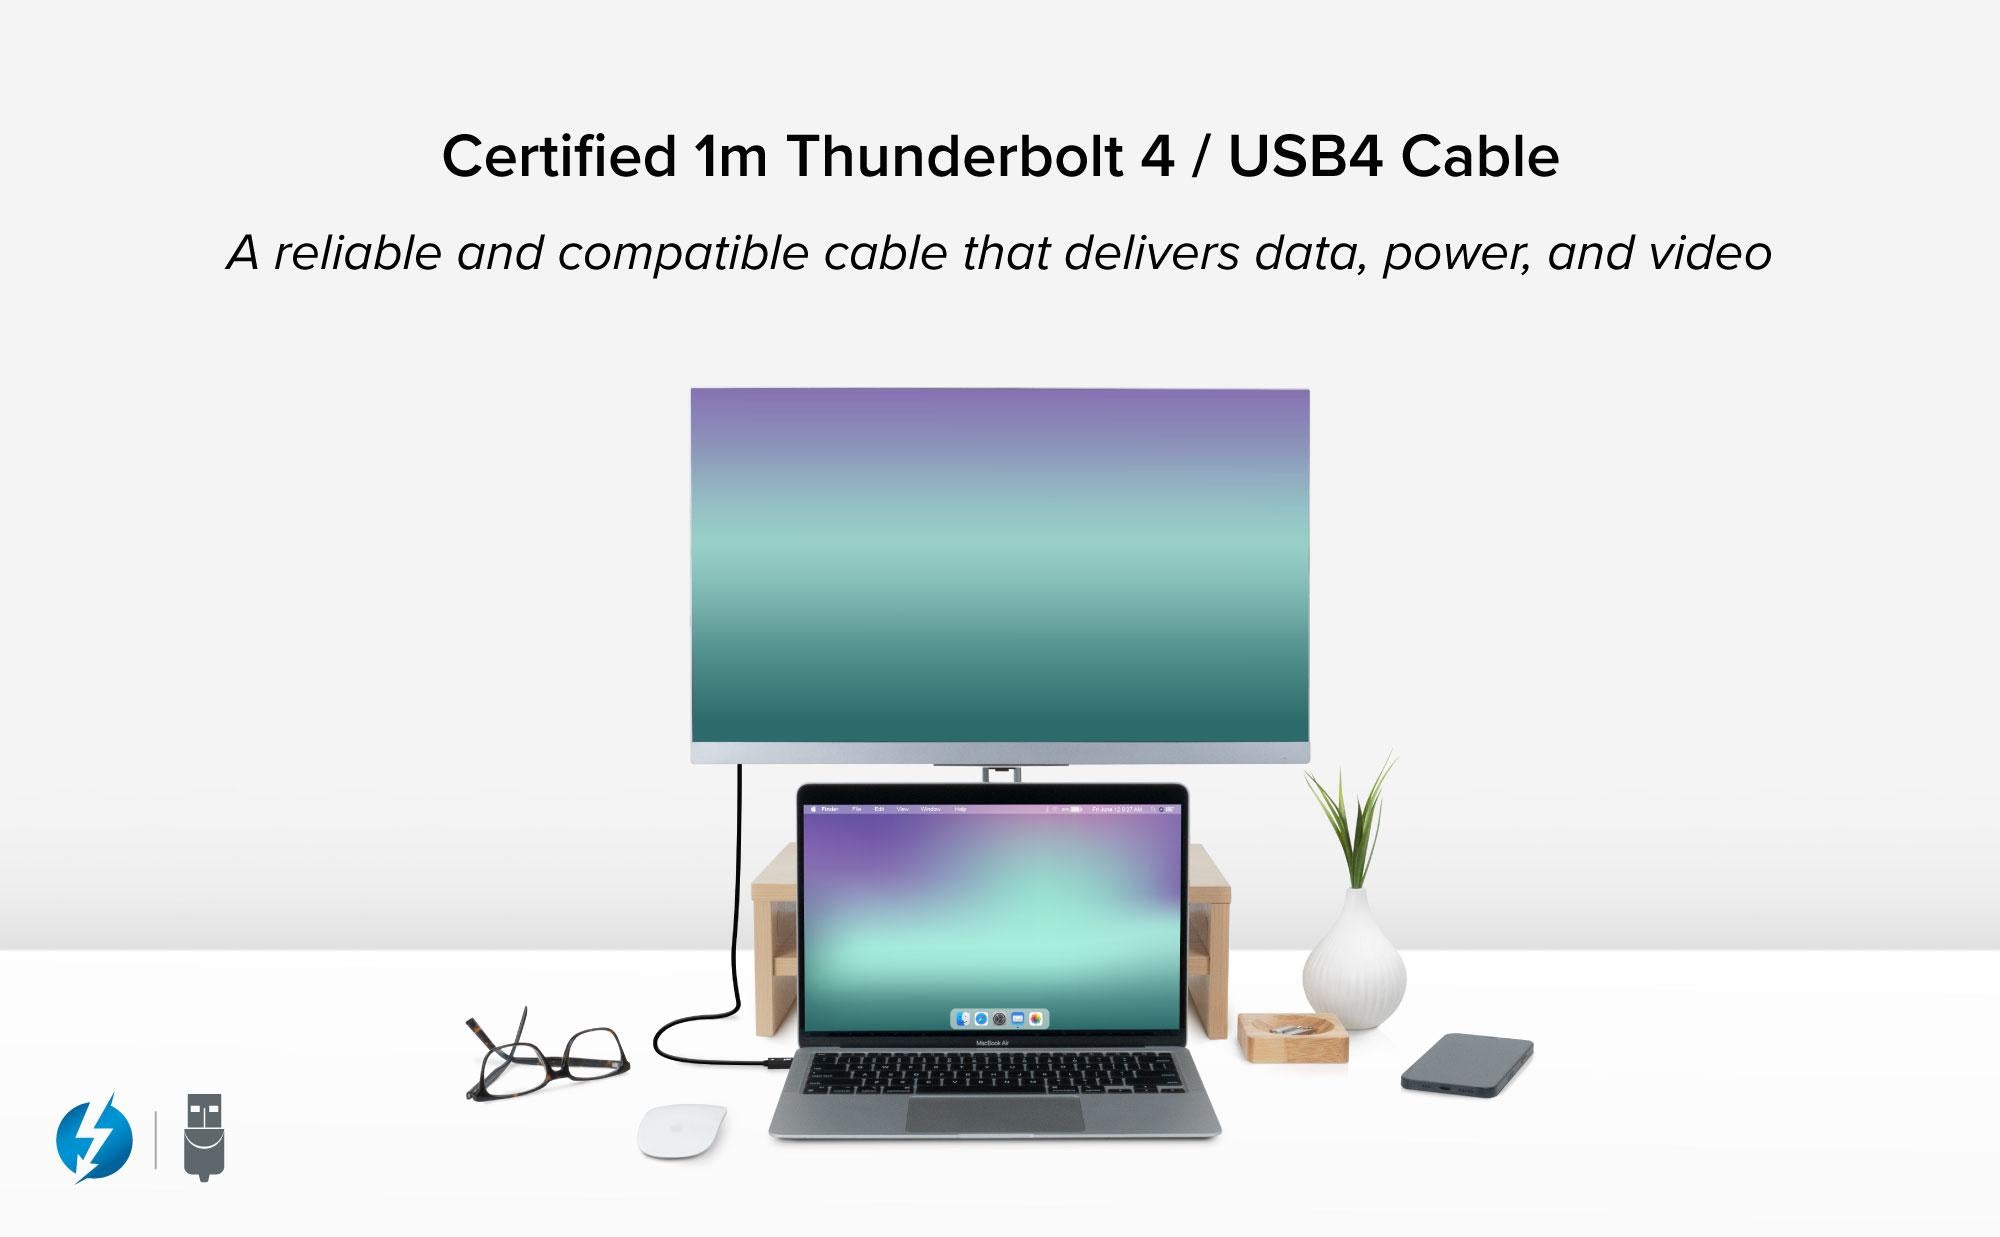 Image of the Plugable Thunderbolt 4 cable being used to connect a laptop to a monitor